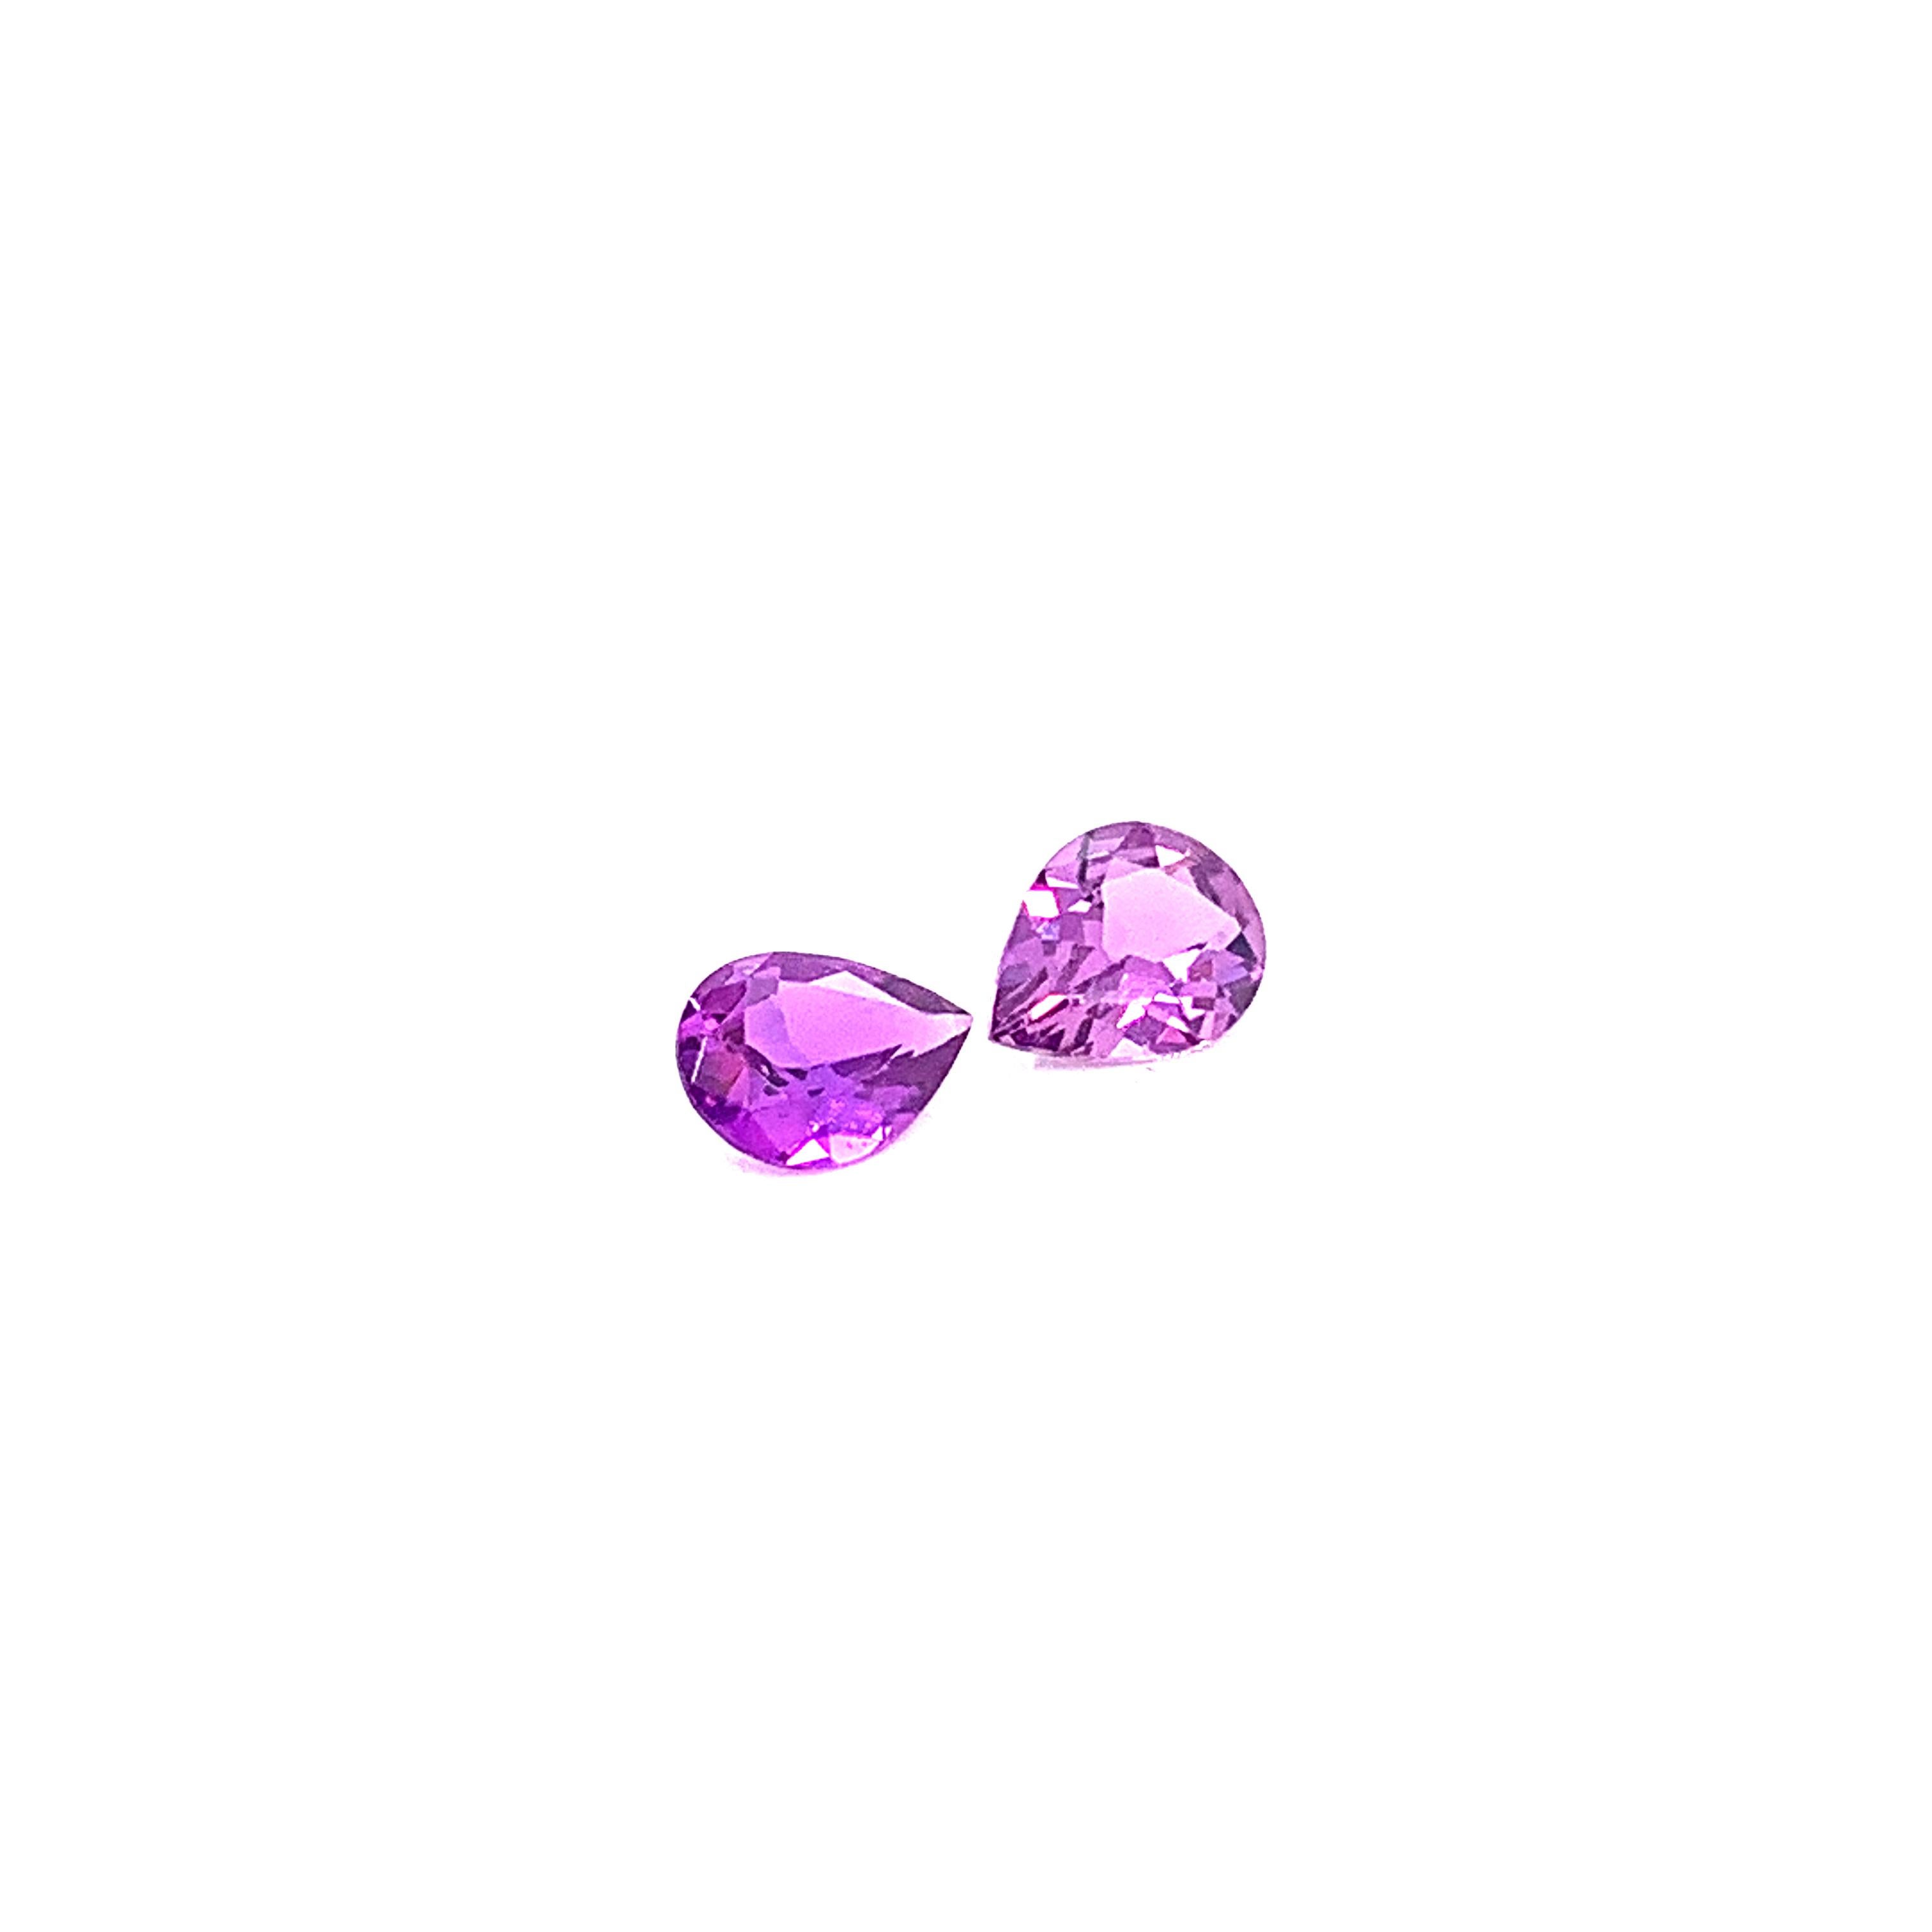 1.45 Carat Pear Shaped Purple Sapphire Pair: 

A very beautiful and elegant pair, it features two natural pear-shaped purple sapphires weighing a total of 1.45 carat. The sapphires have excellent cutting proportions, and possess fine colour